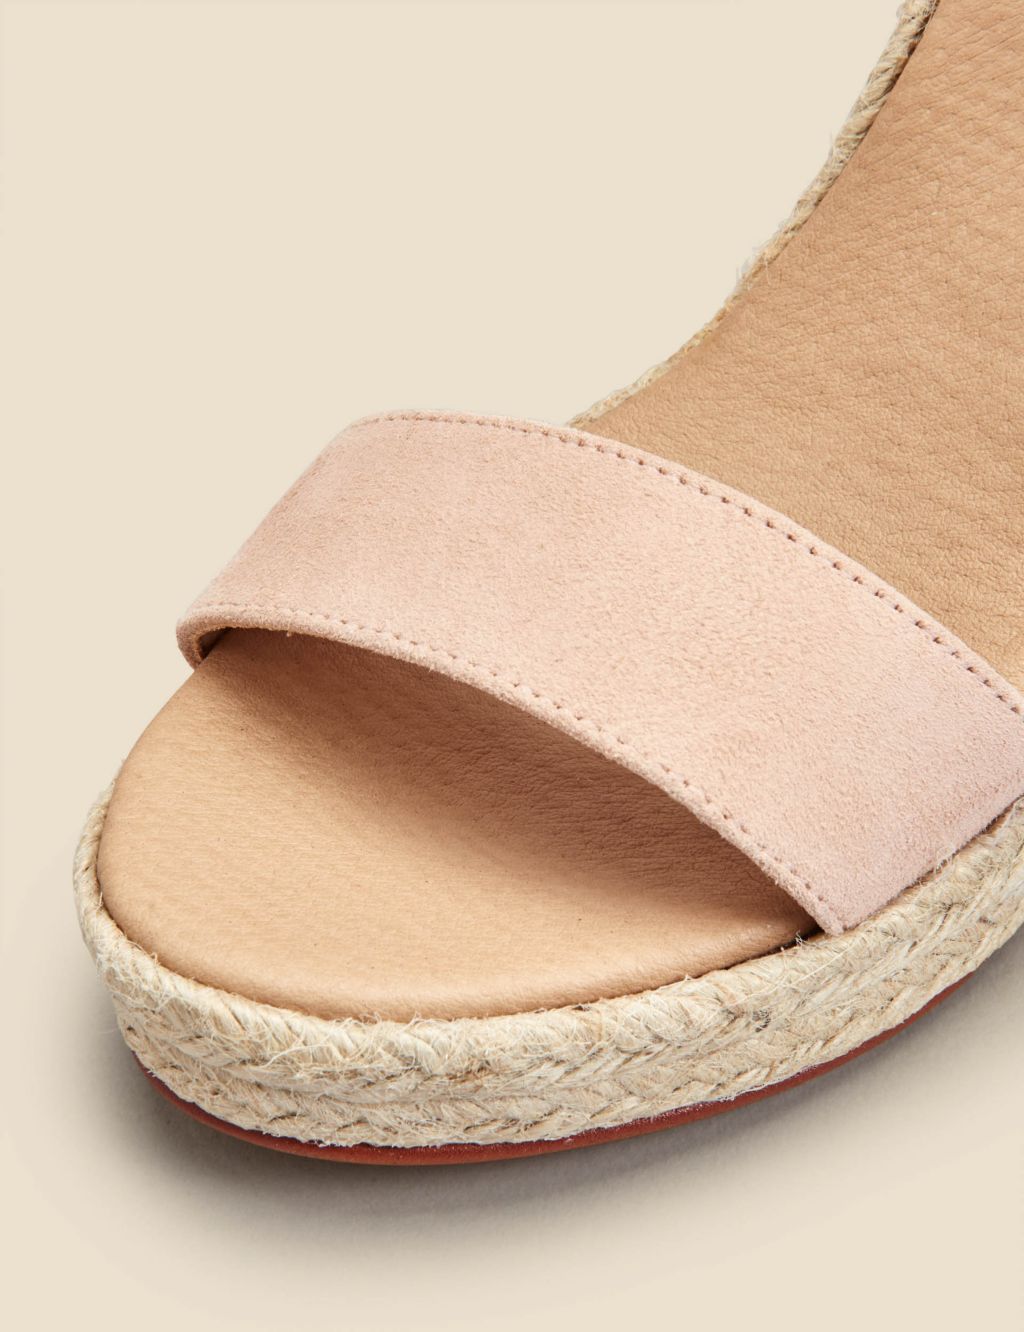 Suede Buckle Ankle Strap Wedge Espadrilles image 4